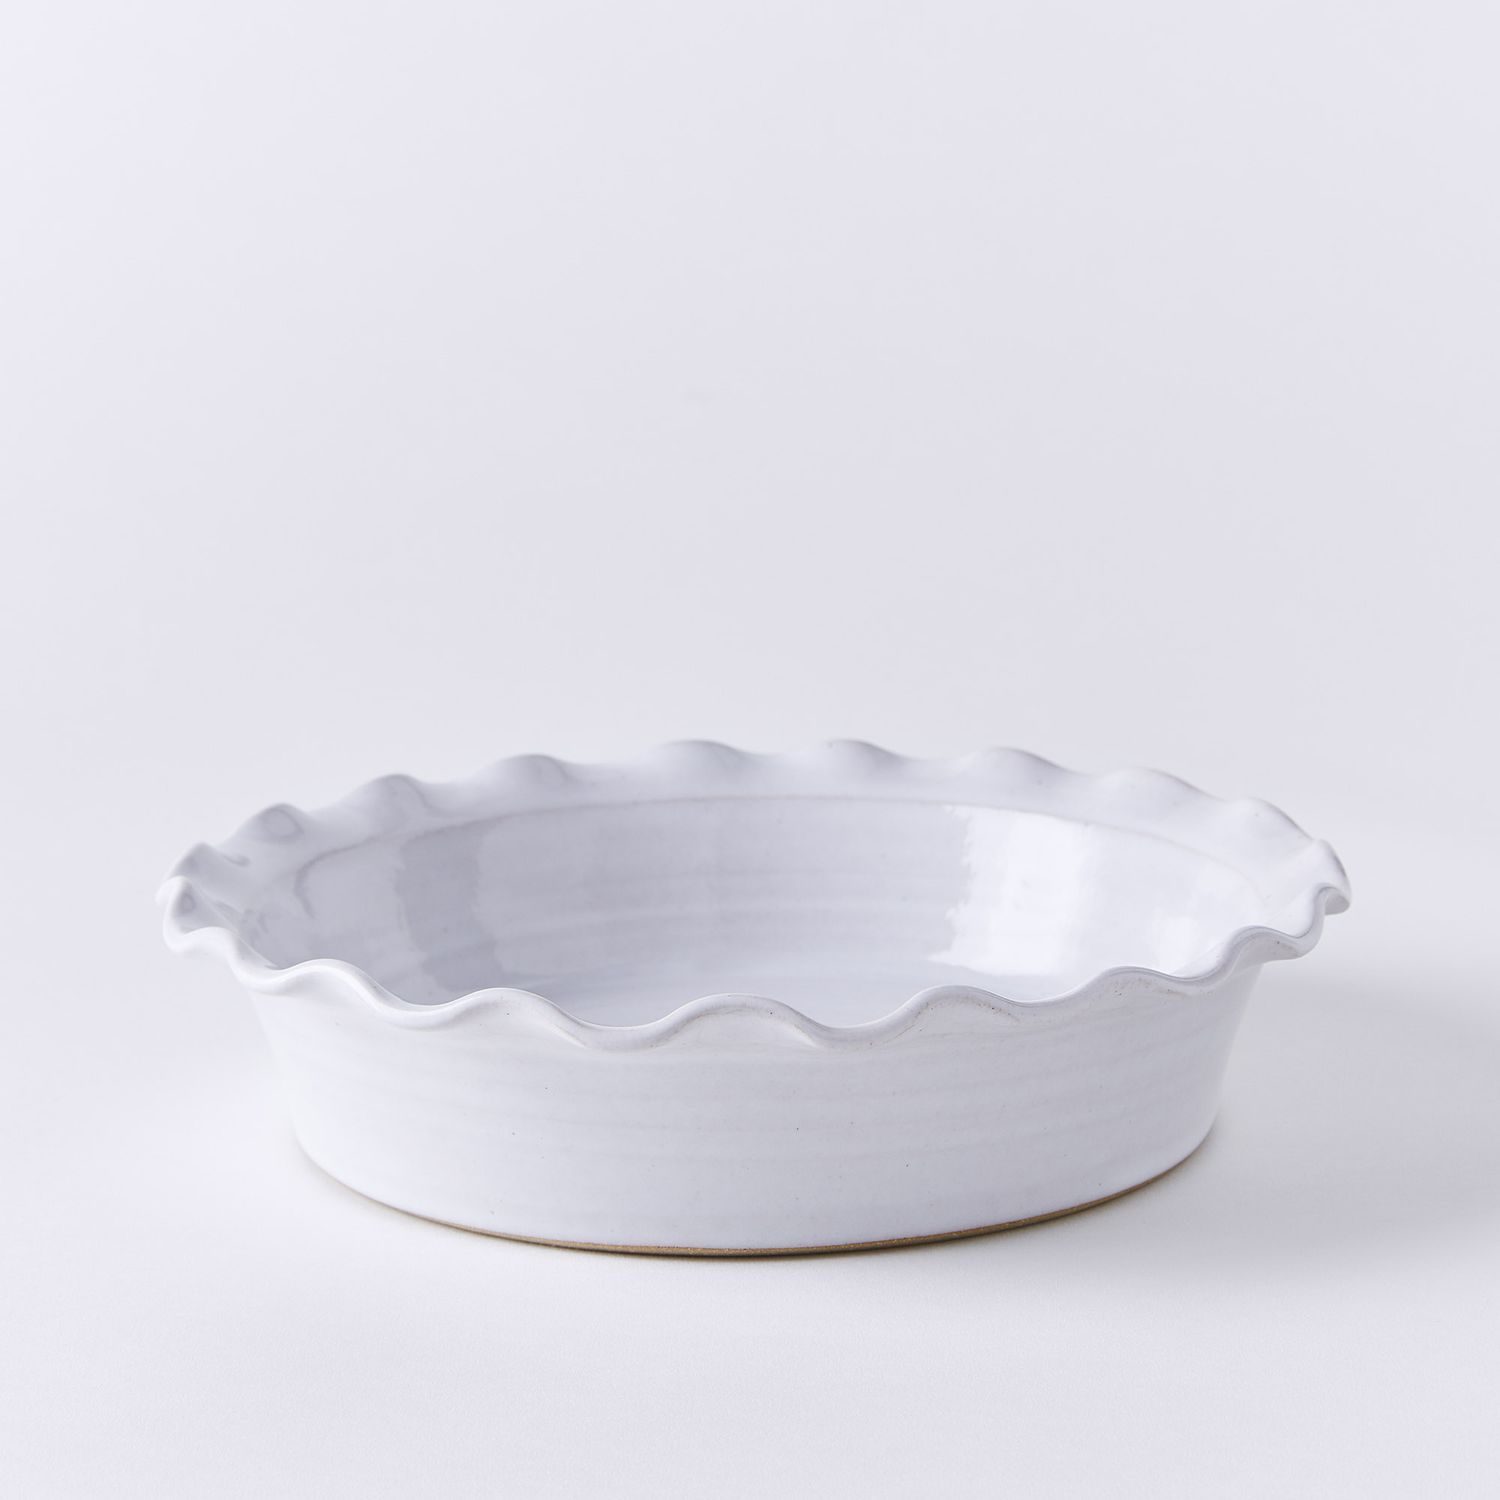 Classic Pie Dish By Farmhouse Pottery On Food52